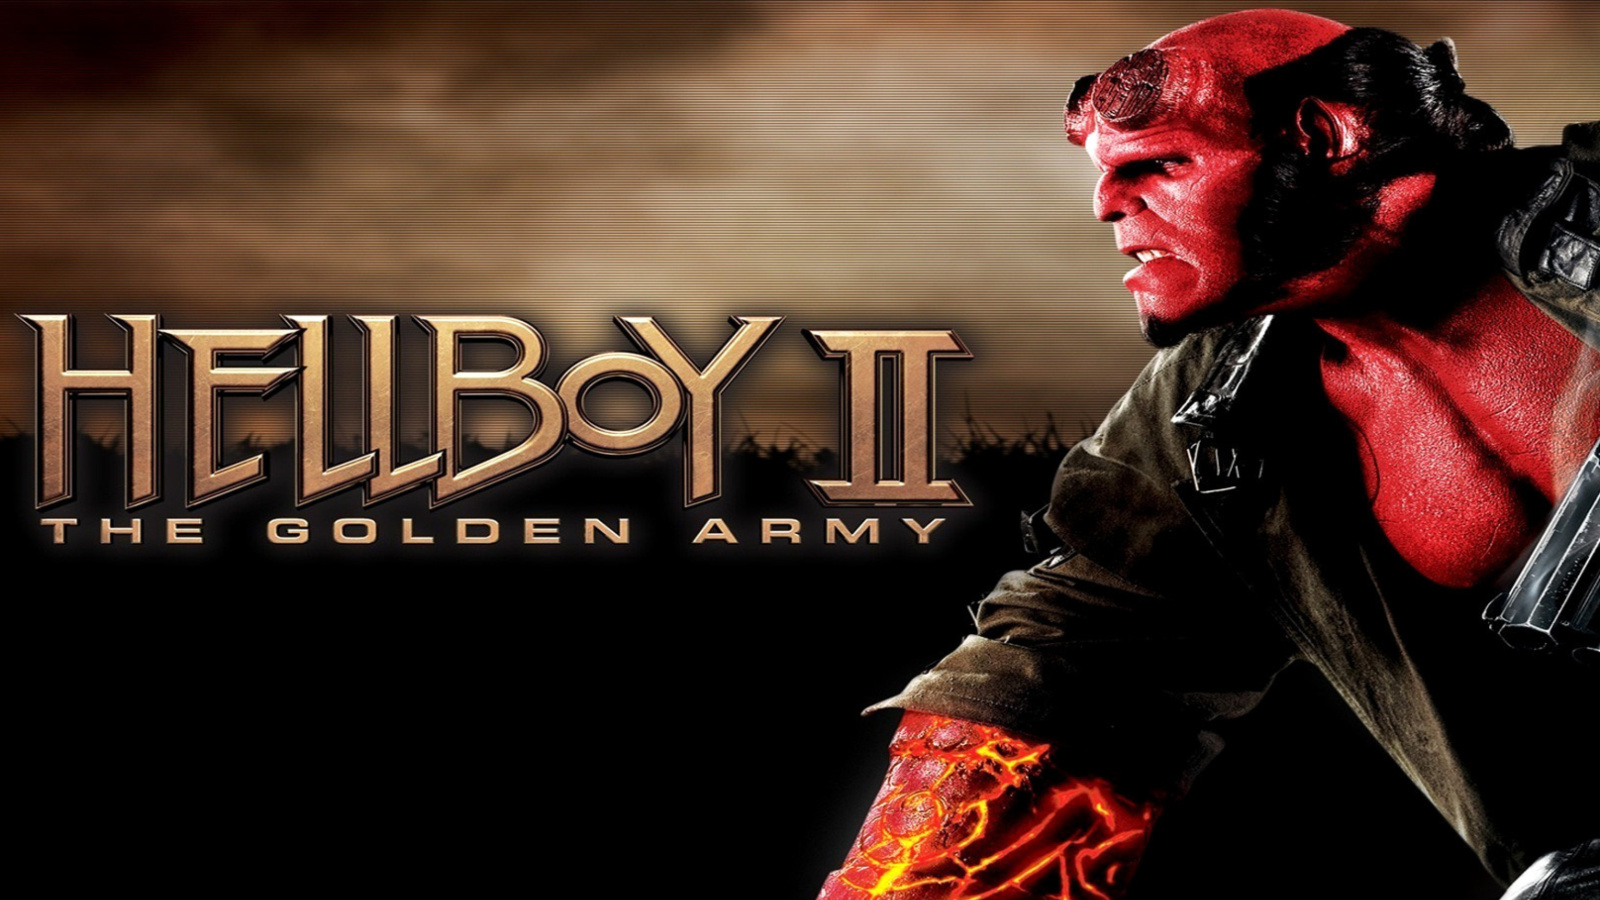 Hellboy II The Golden Army wallpaper 1600x900